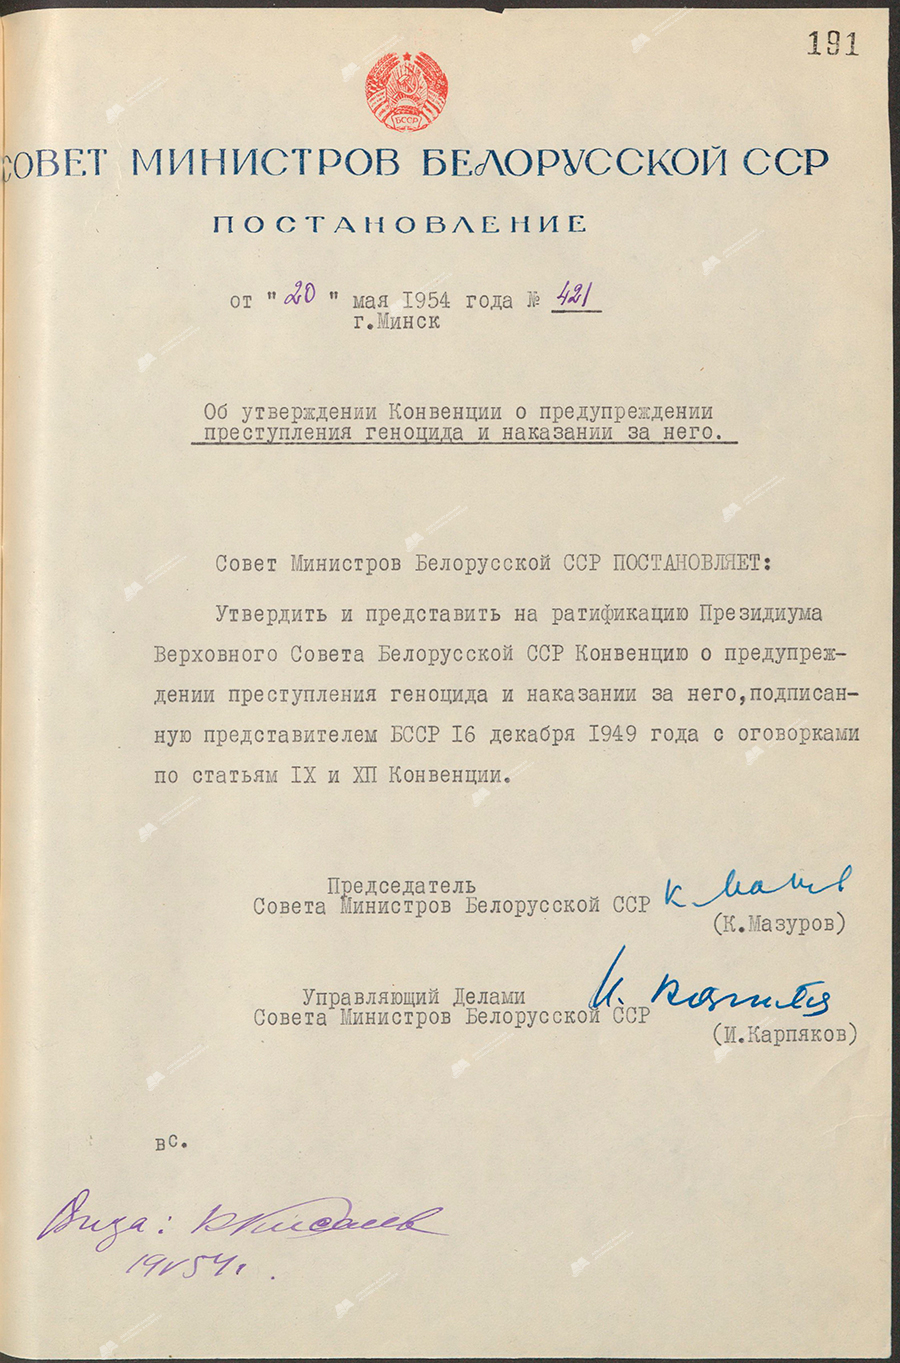 Resolution No. 421 of the Council of Ministers of the Byelorussian SSR «On approval of the Convention on the Prevention and Punishment of the Crime of Genocide»-стр. 0